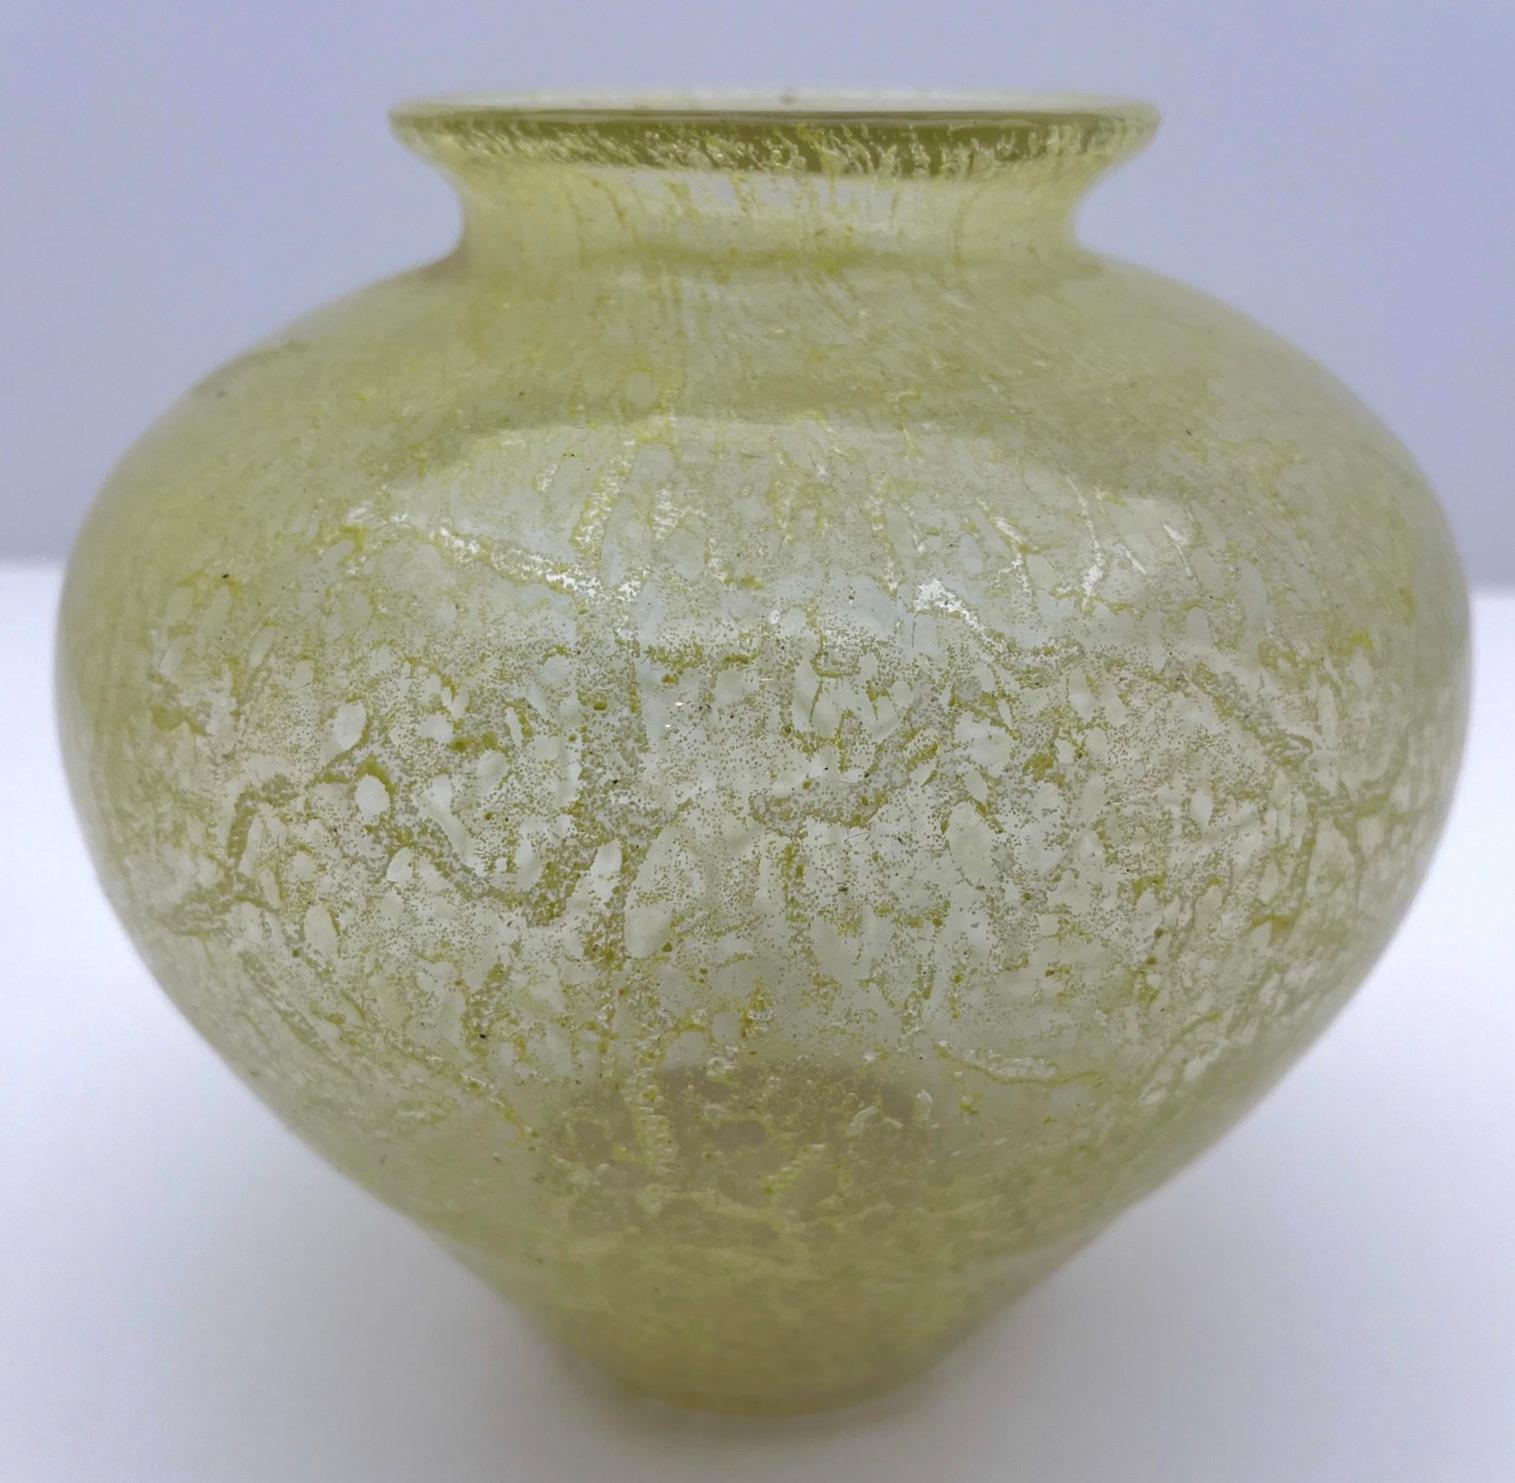 20th Century Ikora Art Glass Vase, Produced, by WMF in Germany, 1930s by Karl Wiedmann For Sale